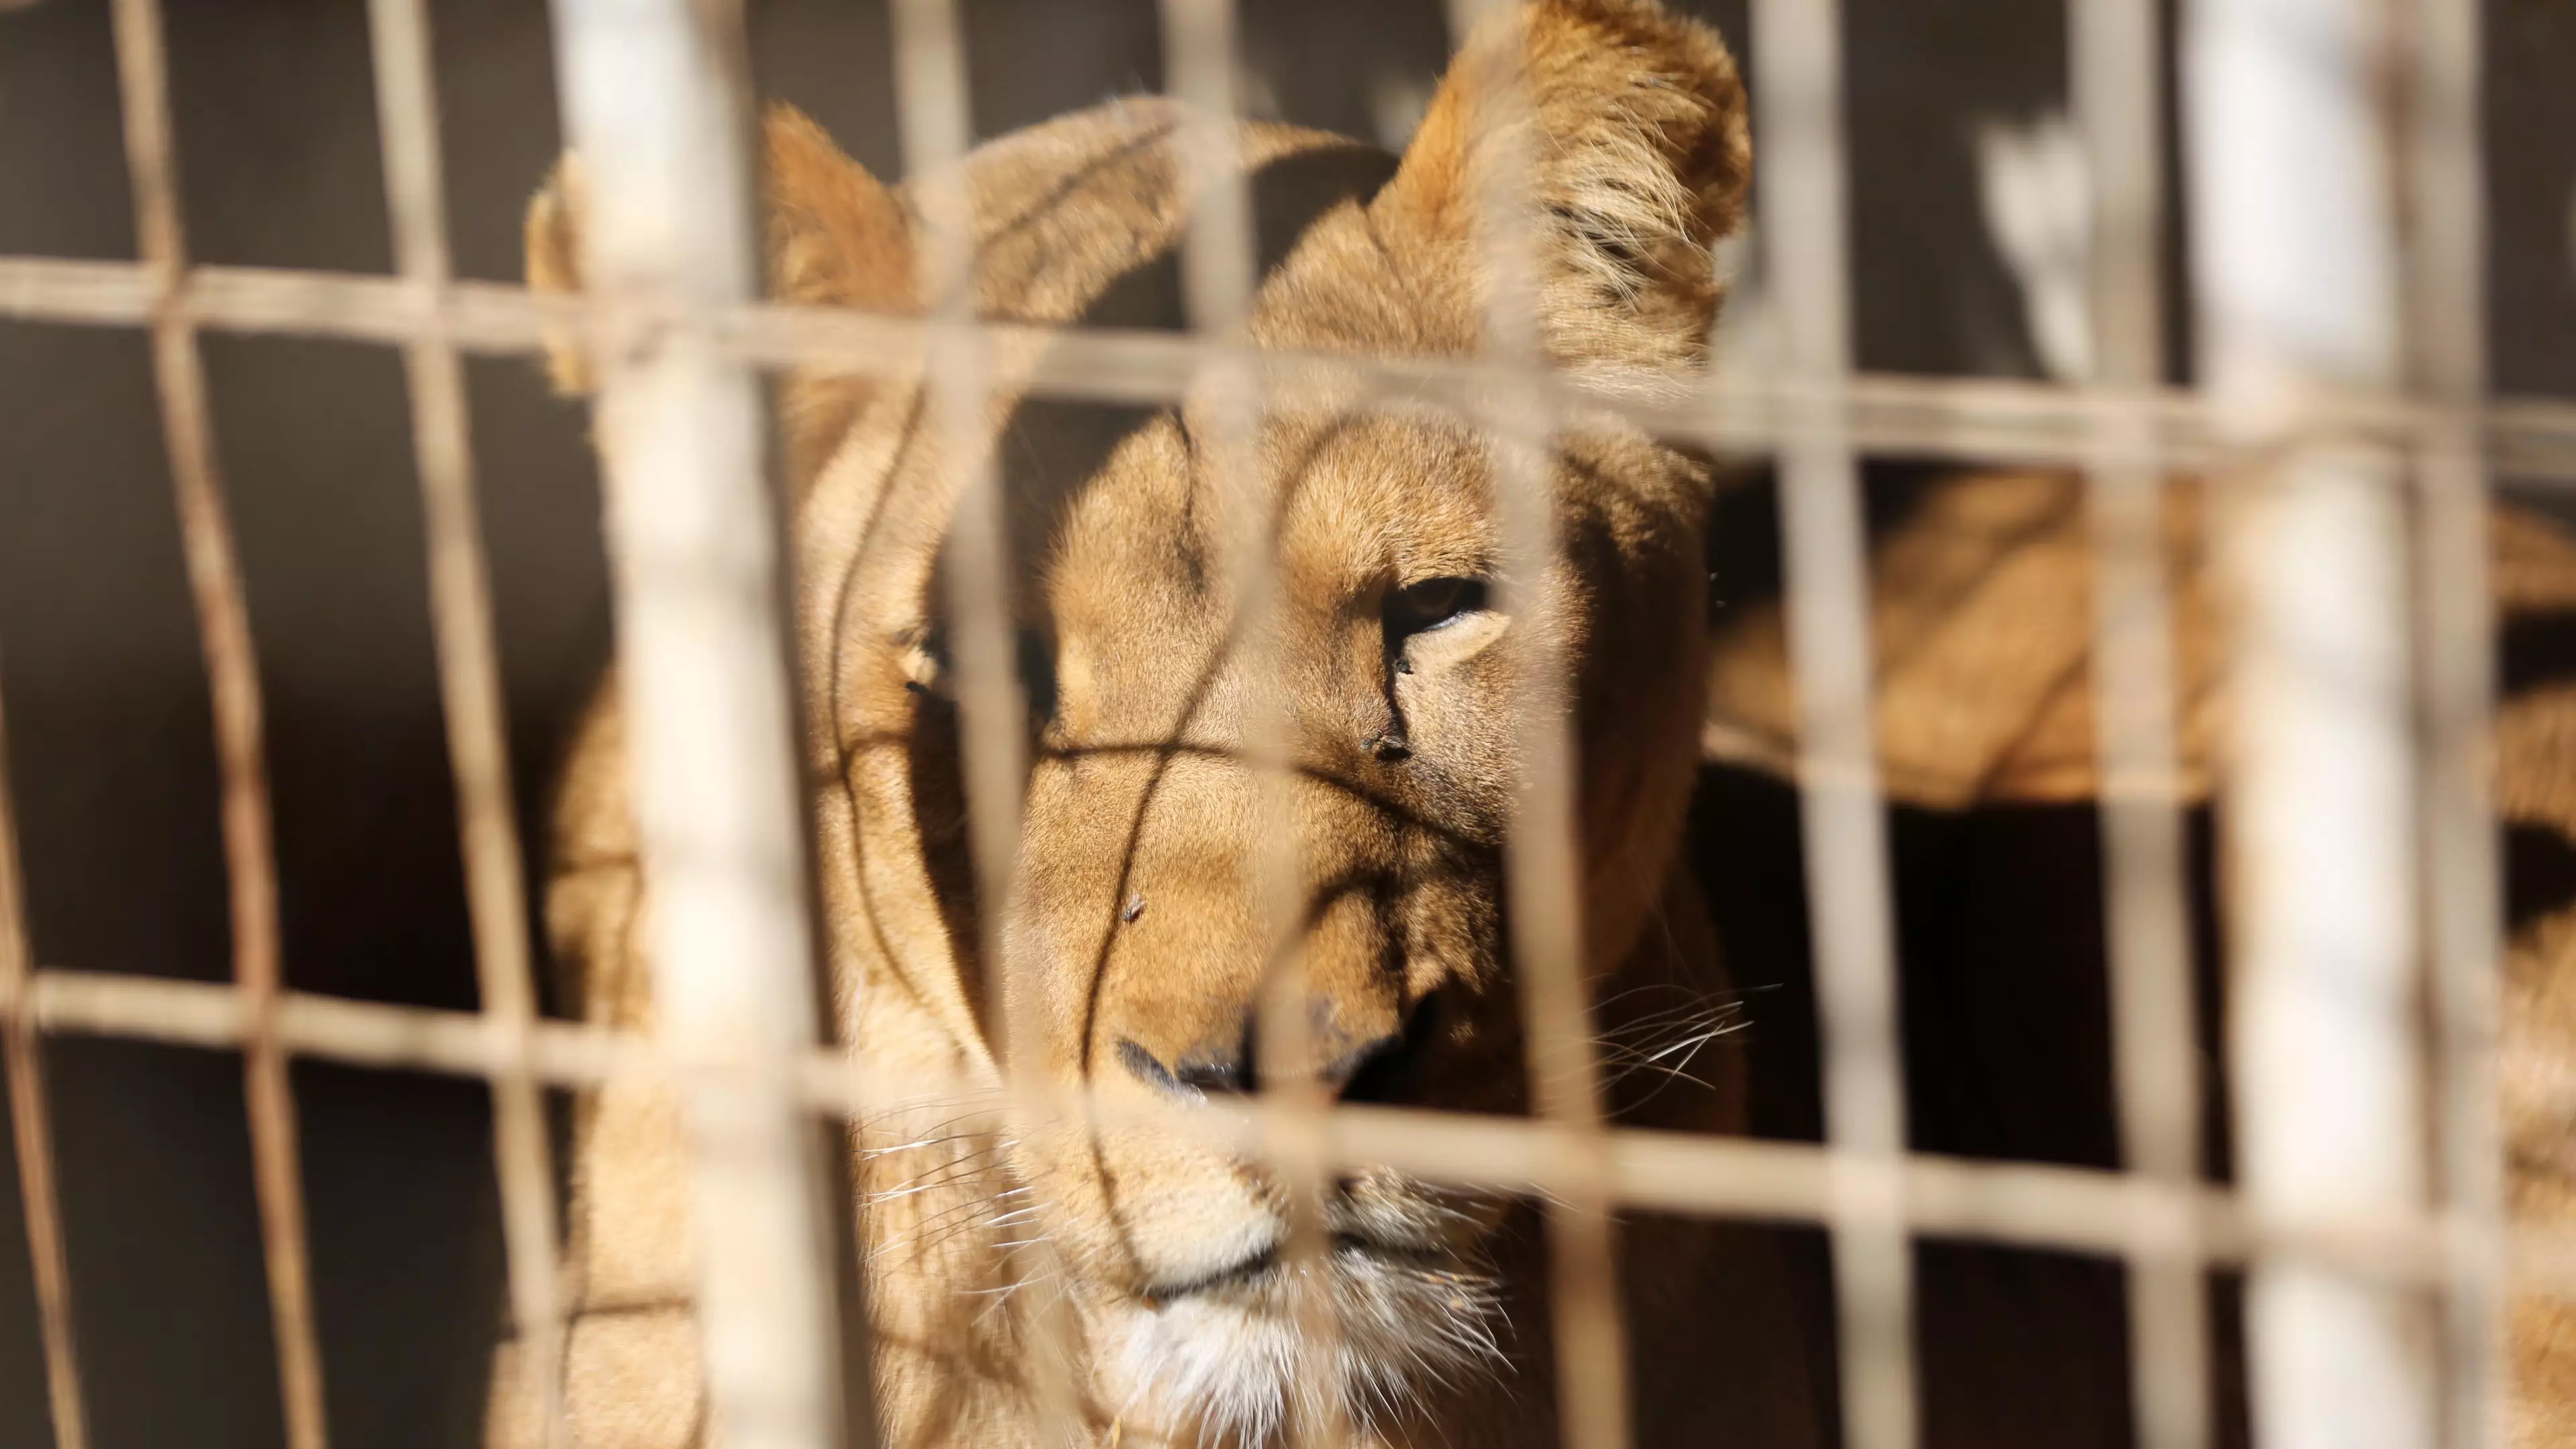 Gaza Zoo Rips Out Lion Cub's Claws So It Can Be 'Friendly With Visitors'